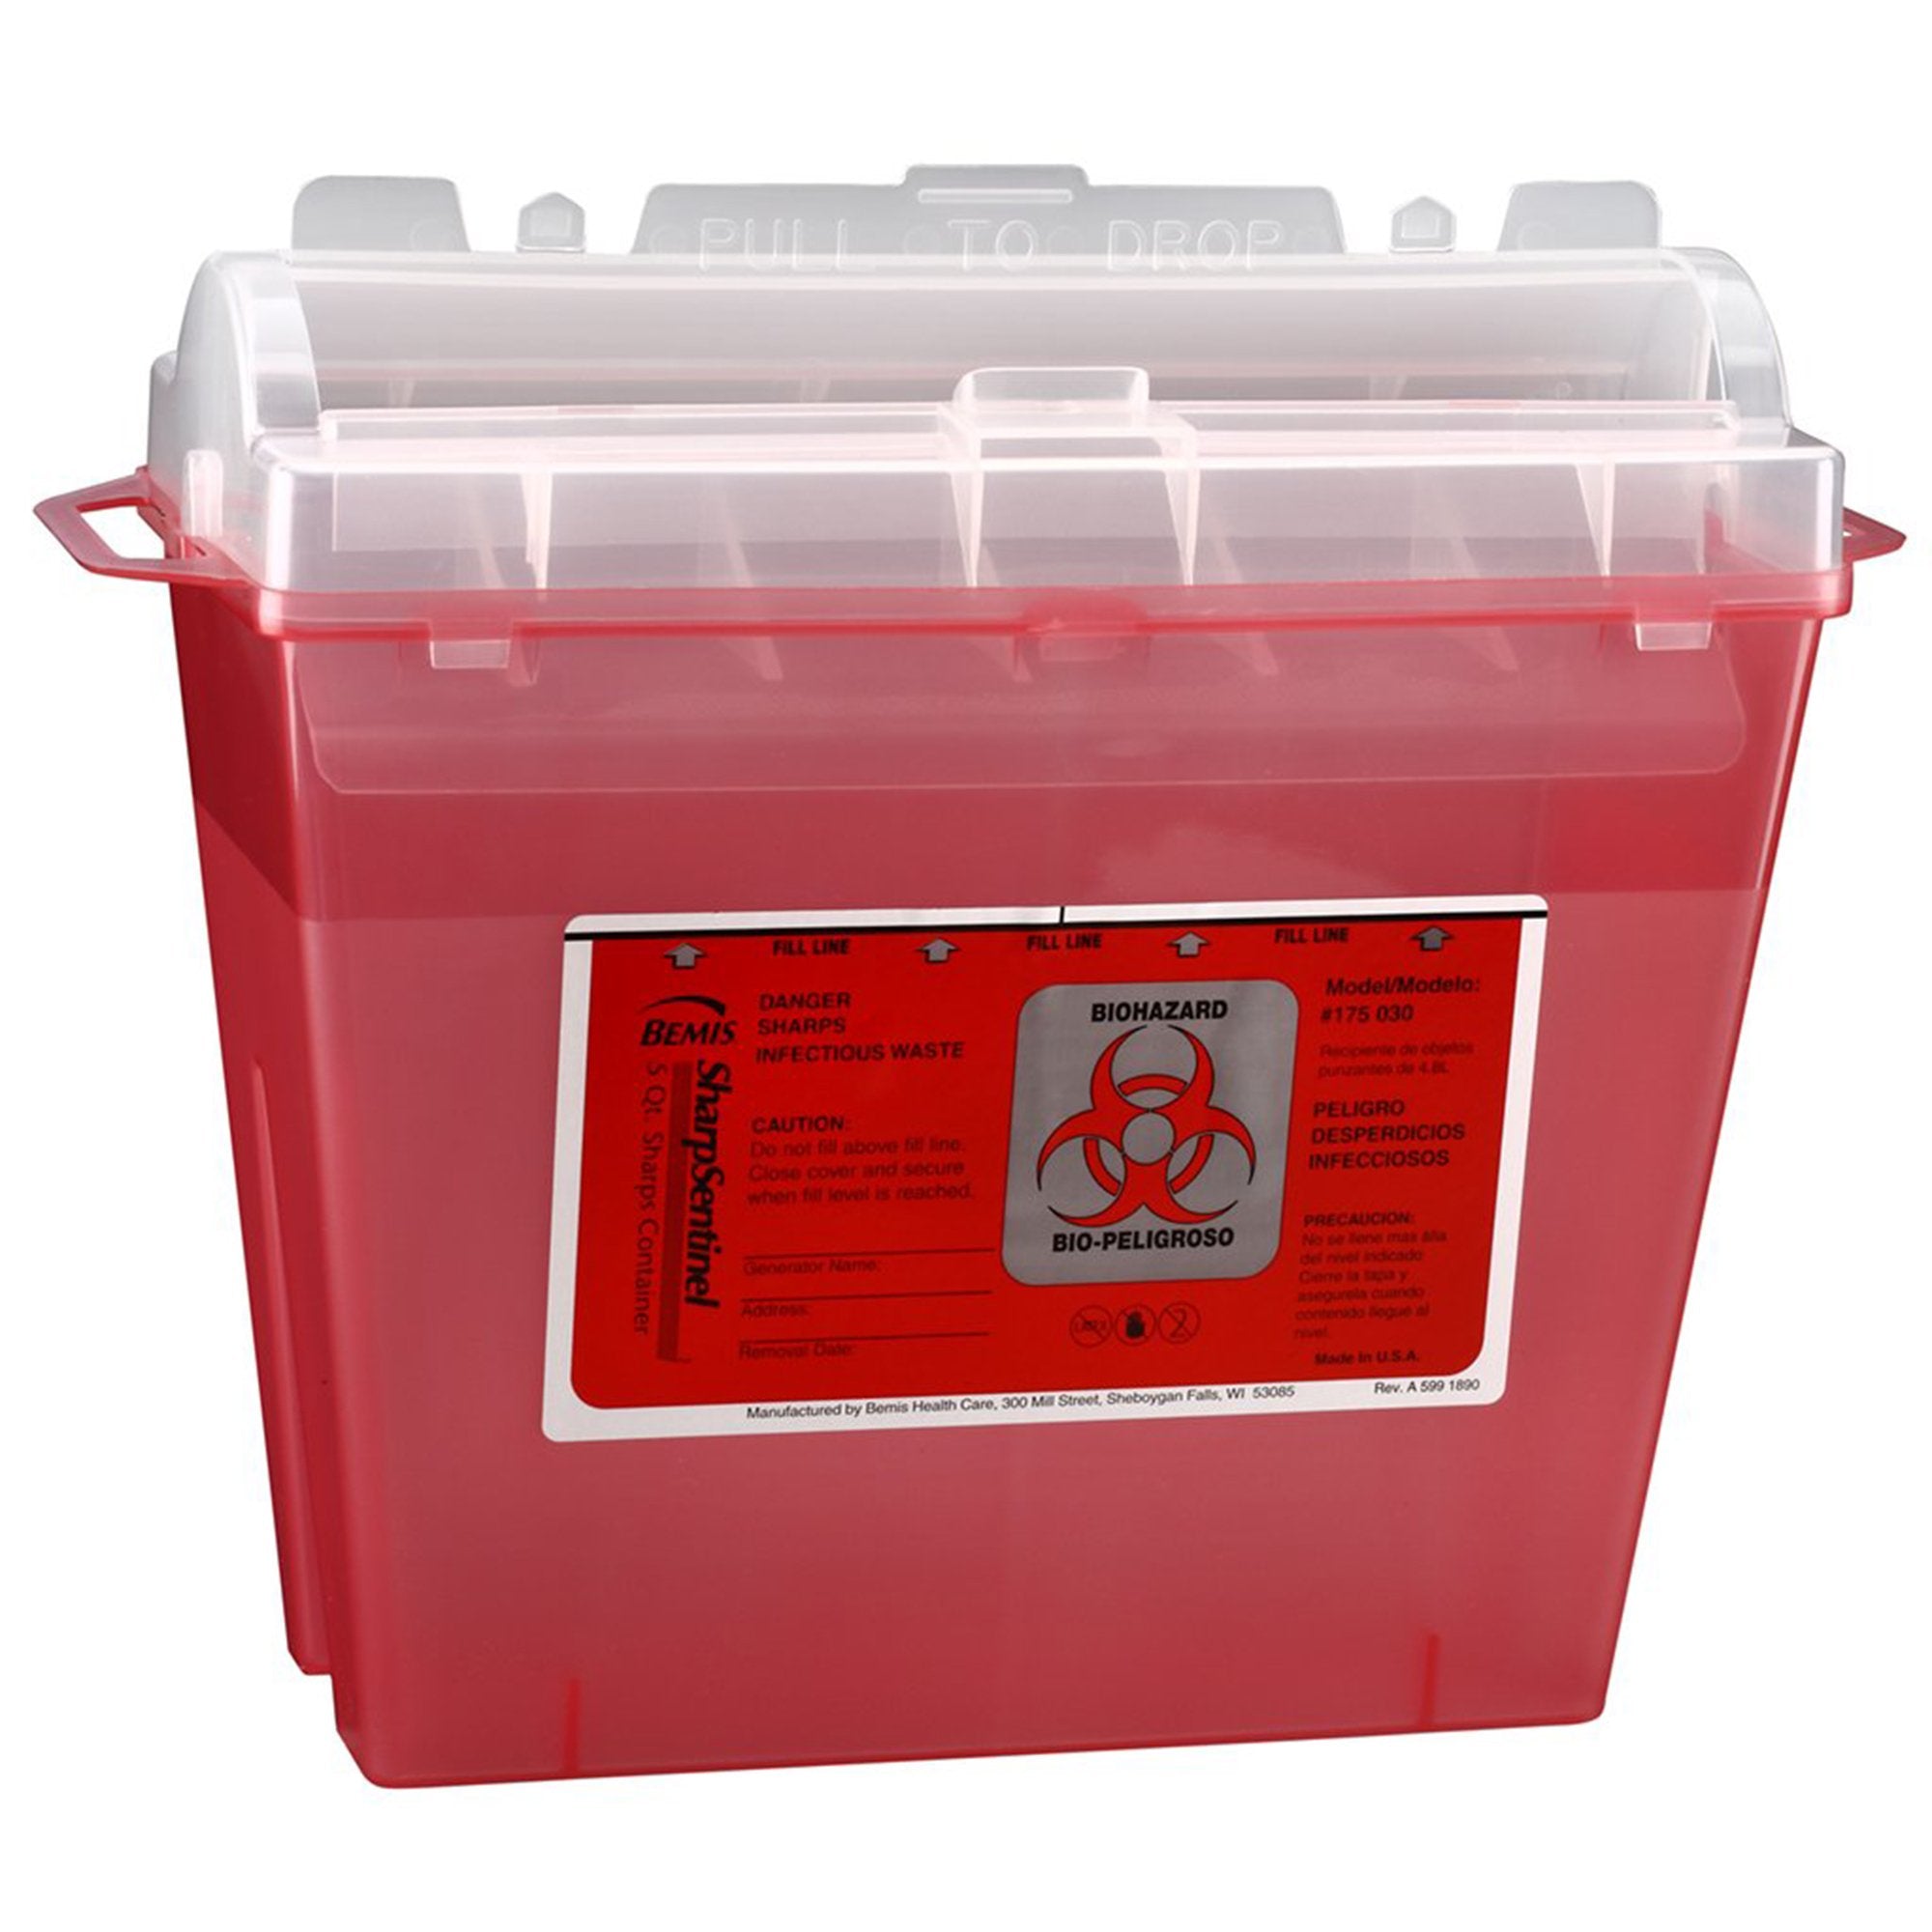 Sharps Container Bemis™ Sentinel Translucent Red Base 10 H X 5-1/4 W X 11 D Inch Horizontal Entry 1.25 Gallon